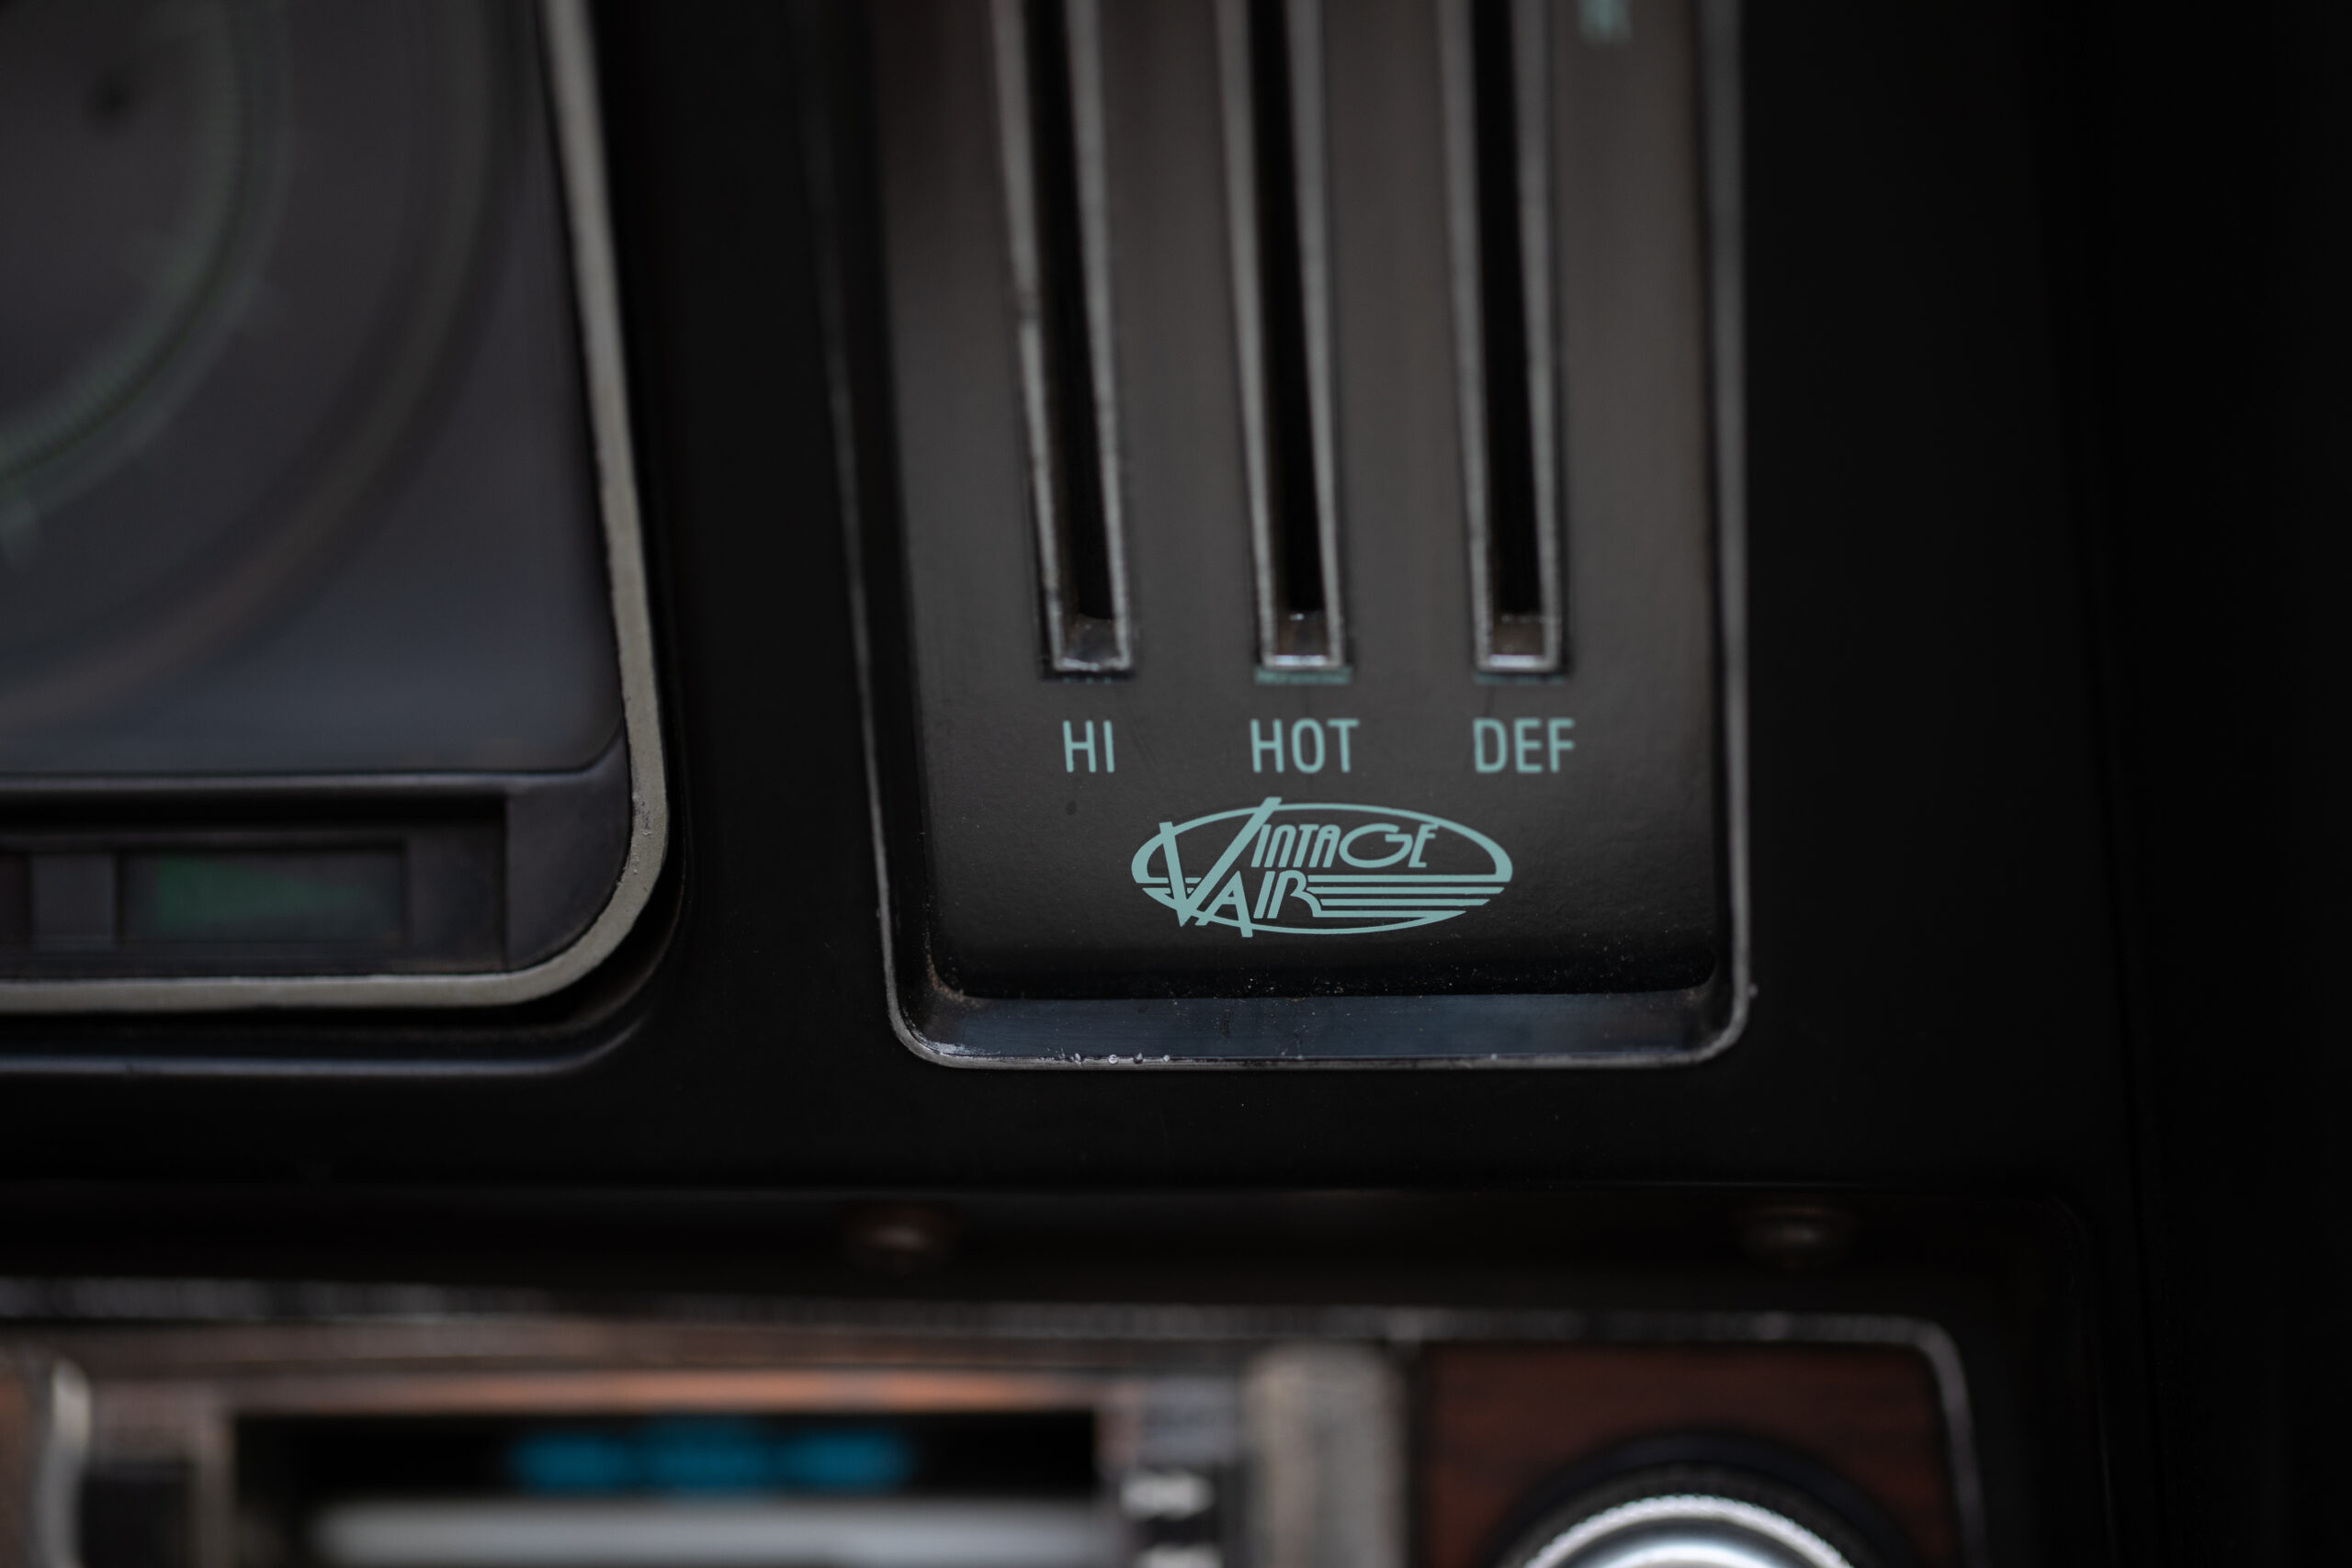 Close-up of a car's vintage climate control panel with options for "HI," "HOT," and "DEF," featuring the "Airtop Air" logo.